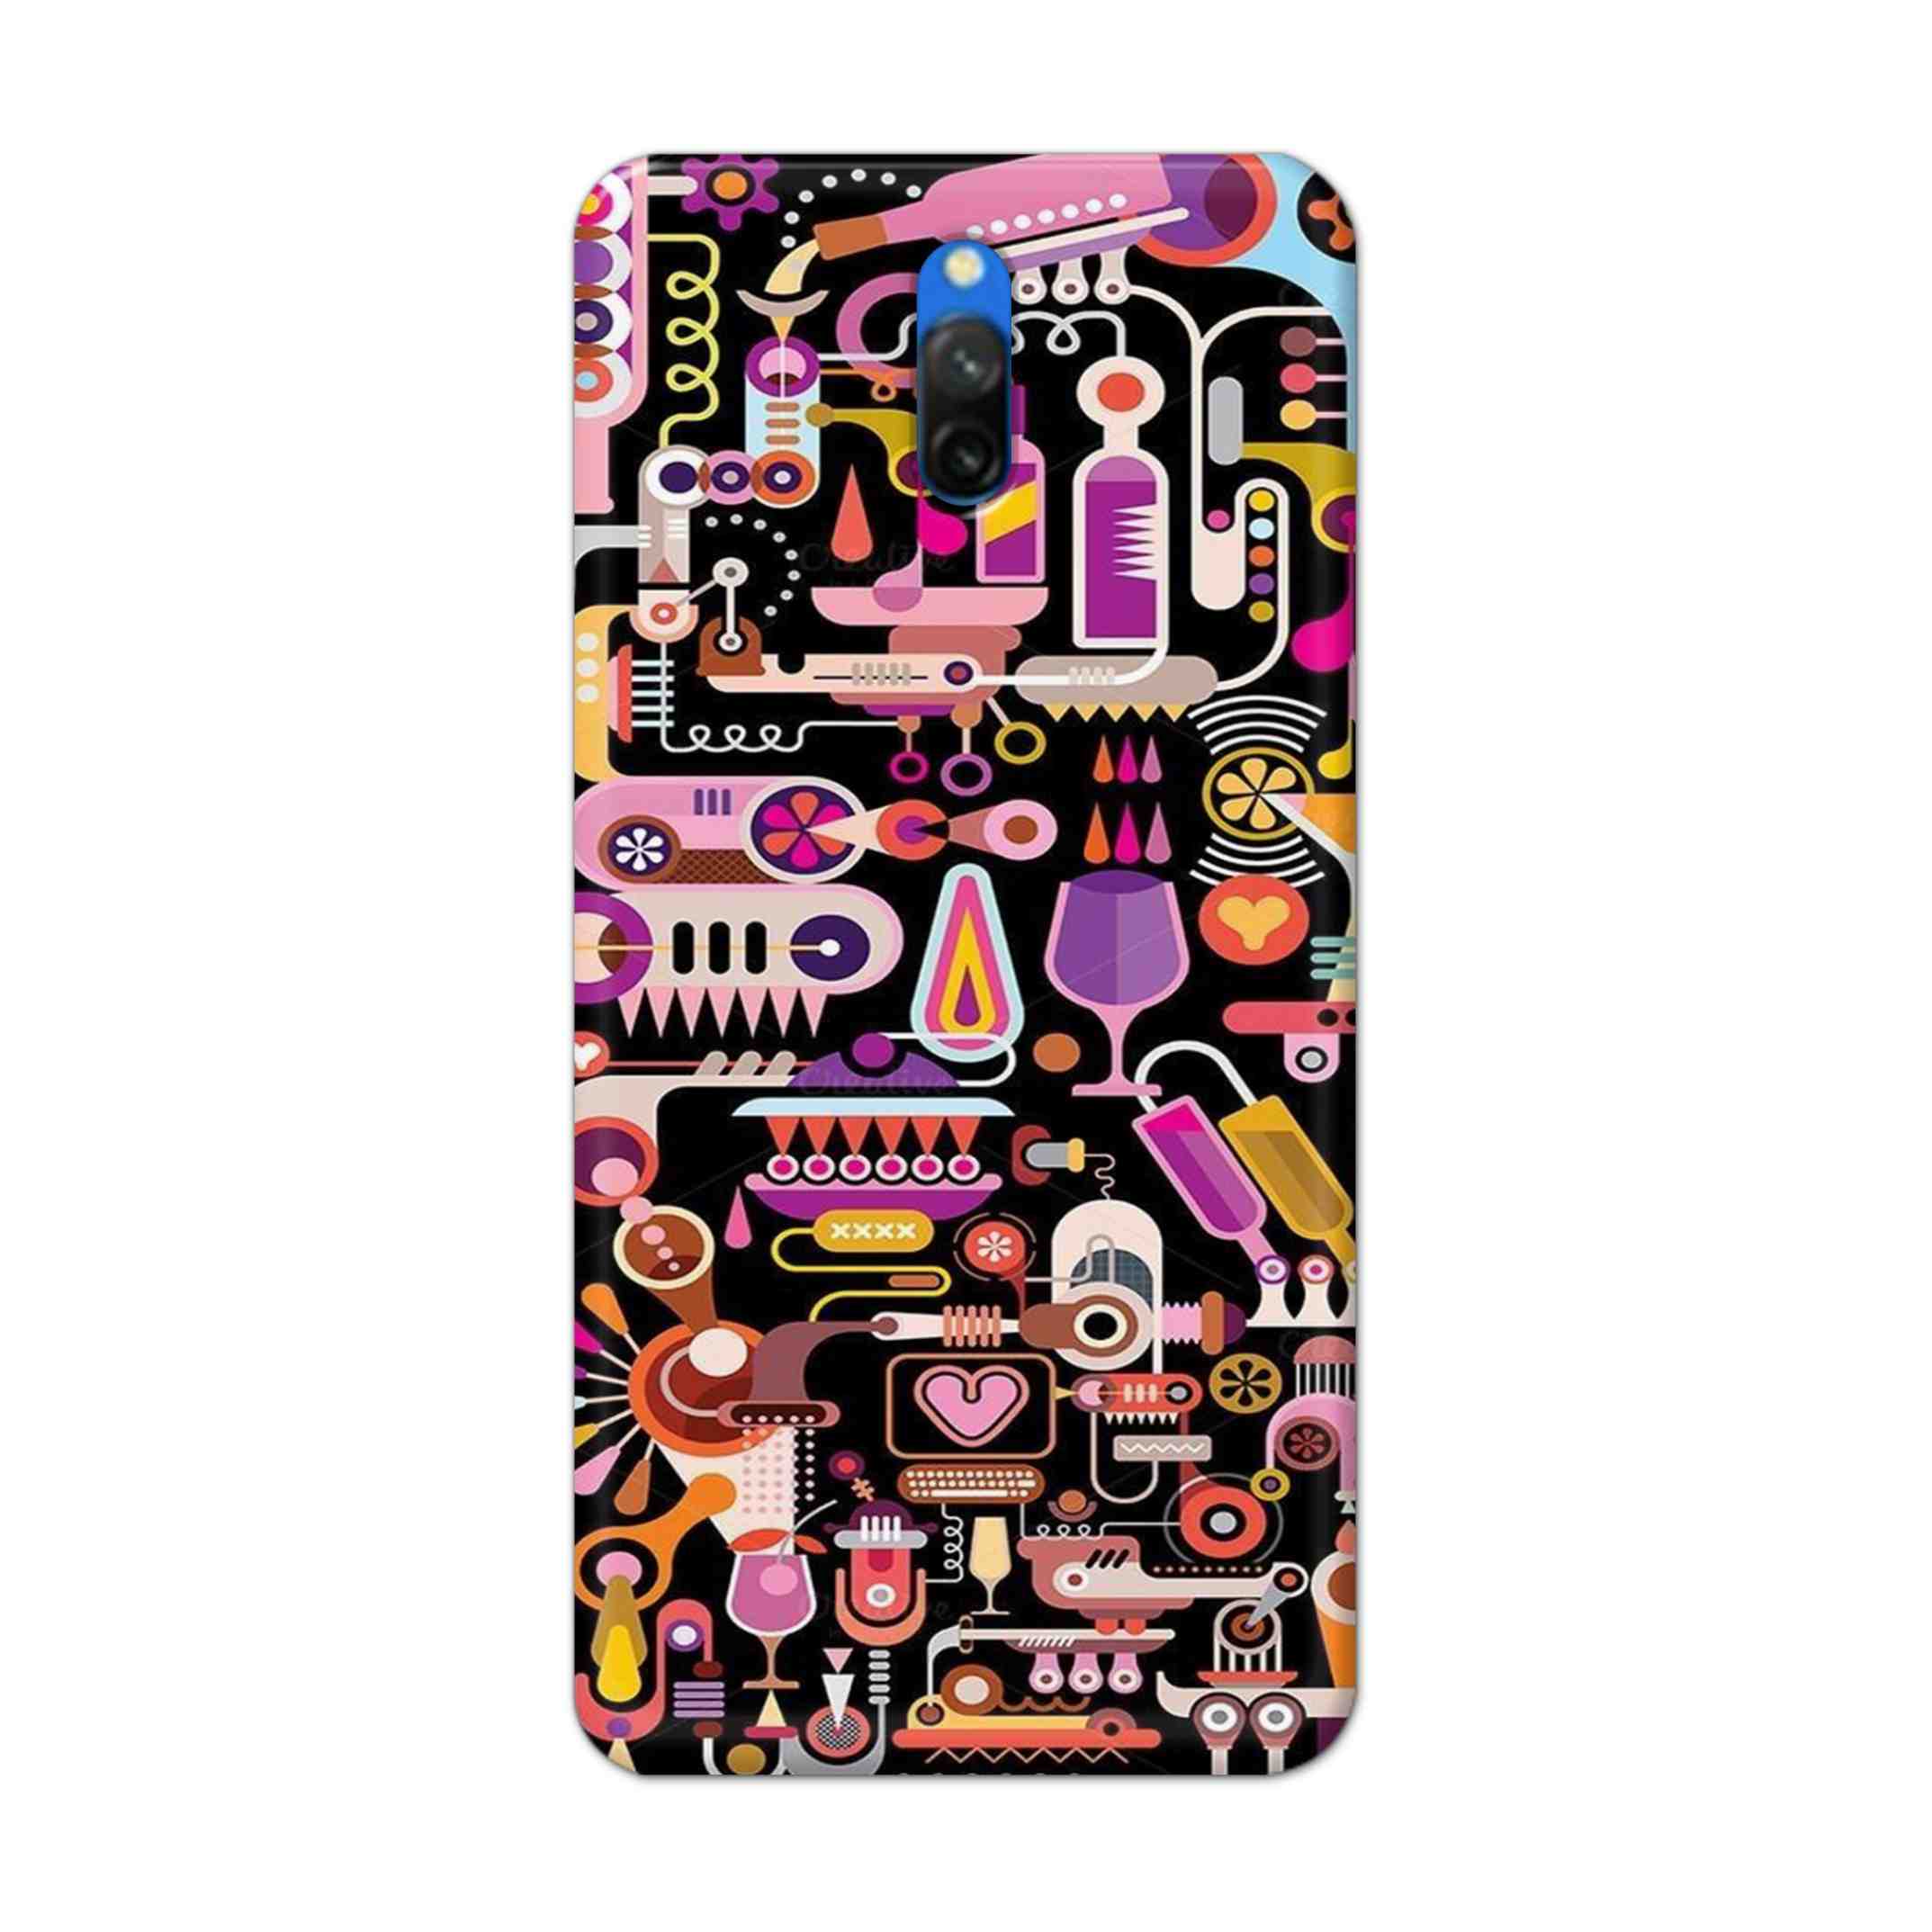 Buy Art Hard Back Mobile Phone Case/Cover For Redmi 8A Dual Online